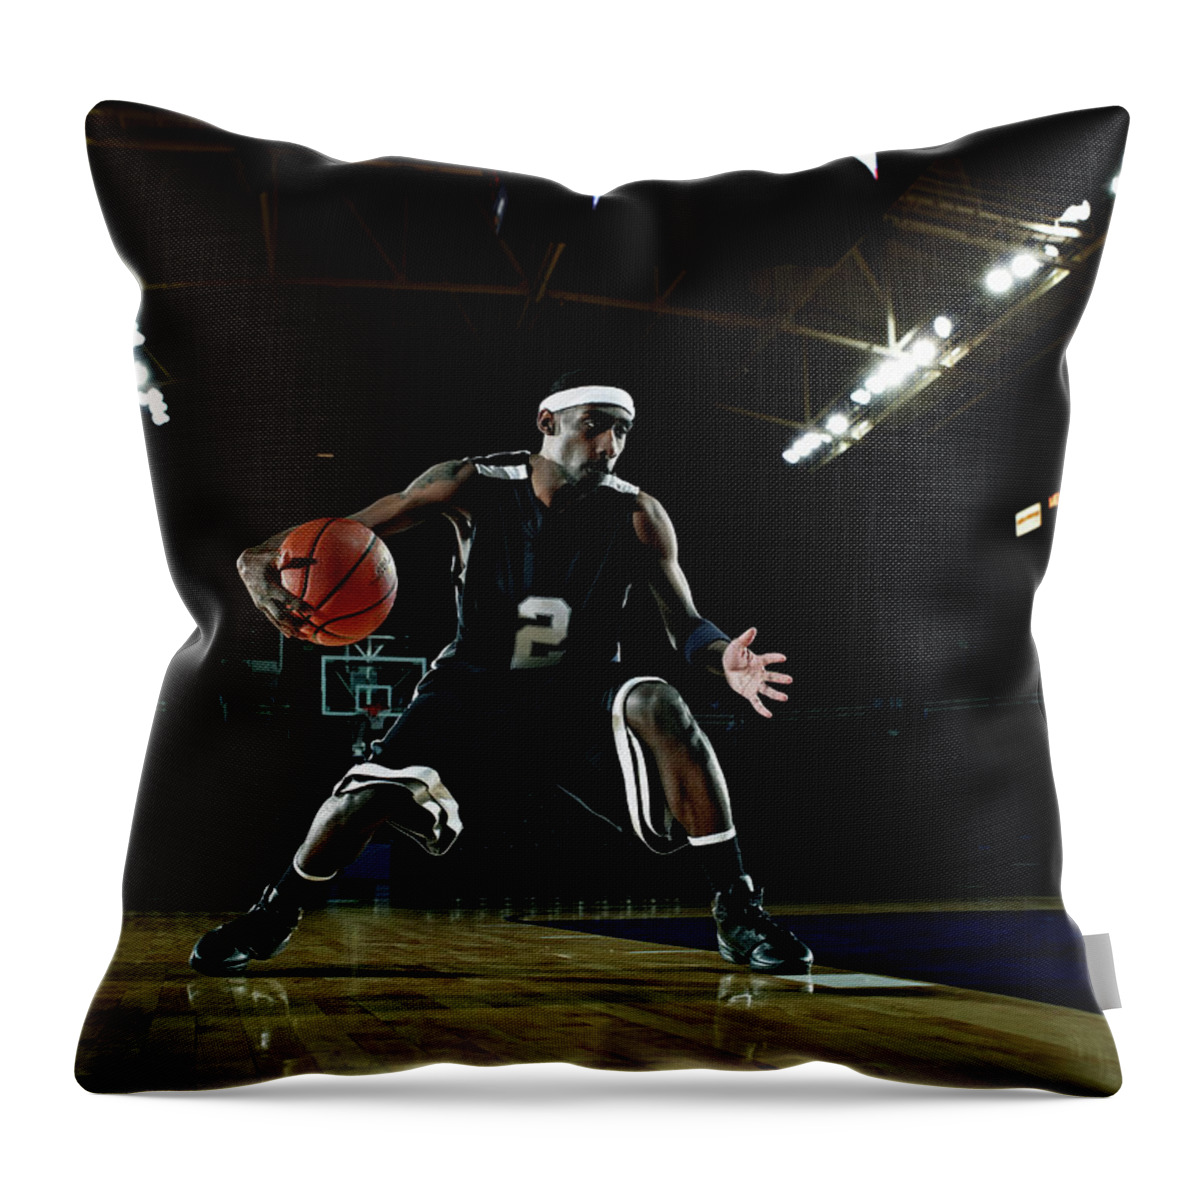 Expertise Throw Pillow featuring the photograph Basketball Player Dribbling Basketball by Thomas Barwick